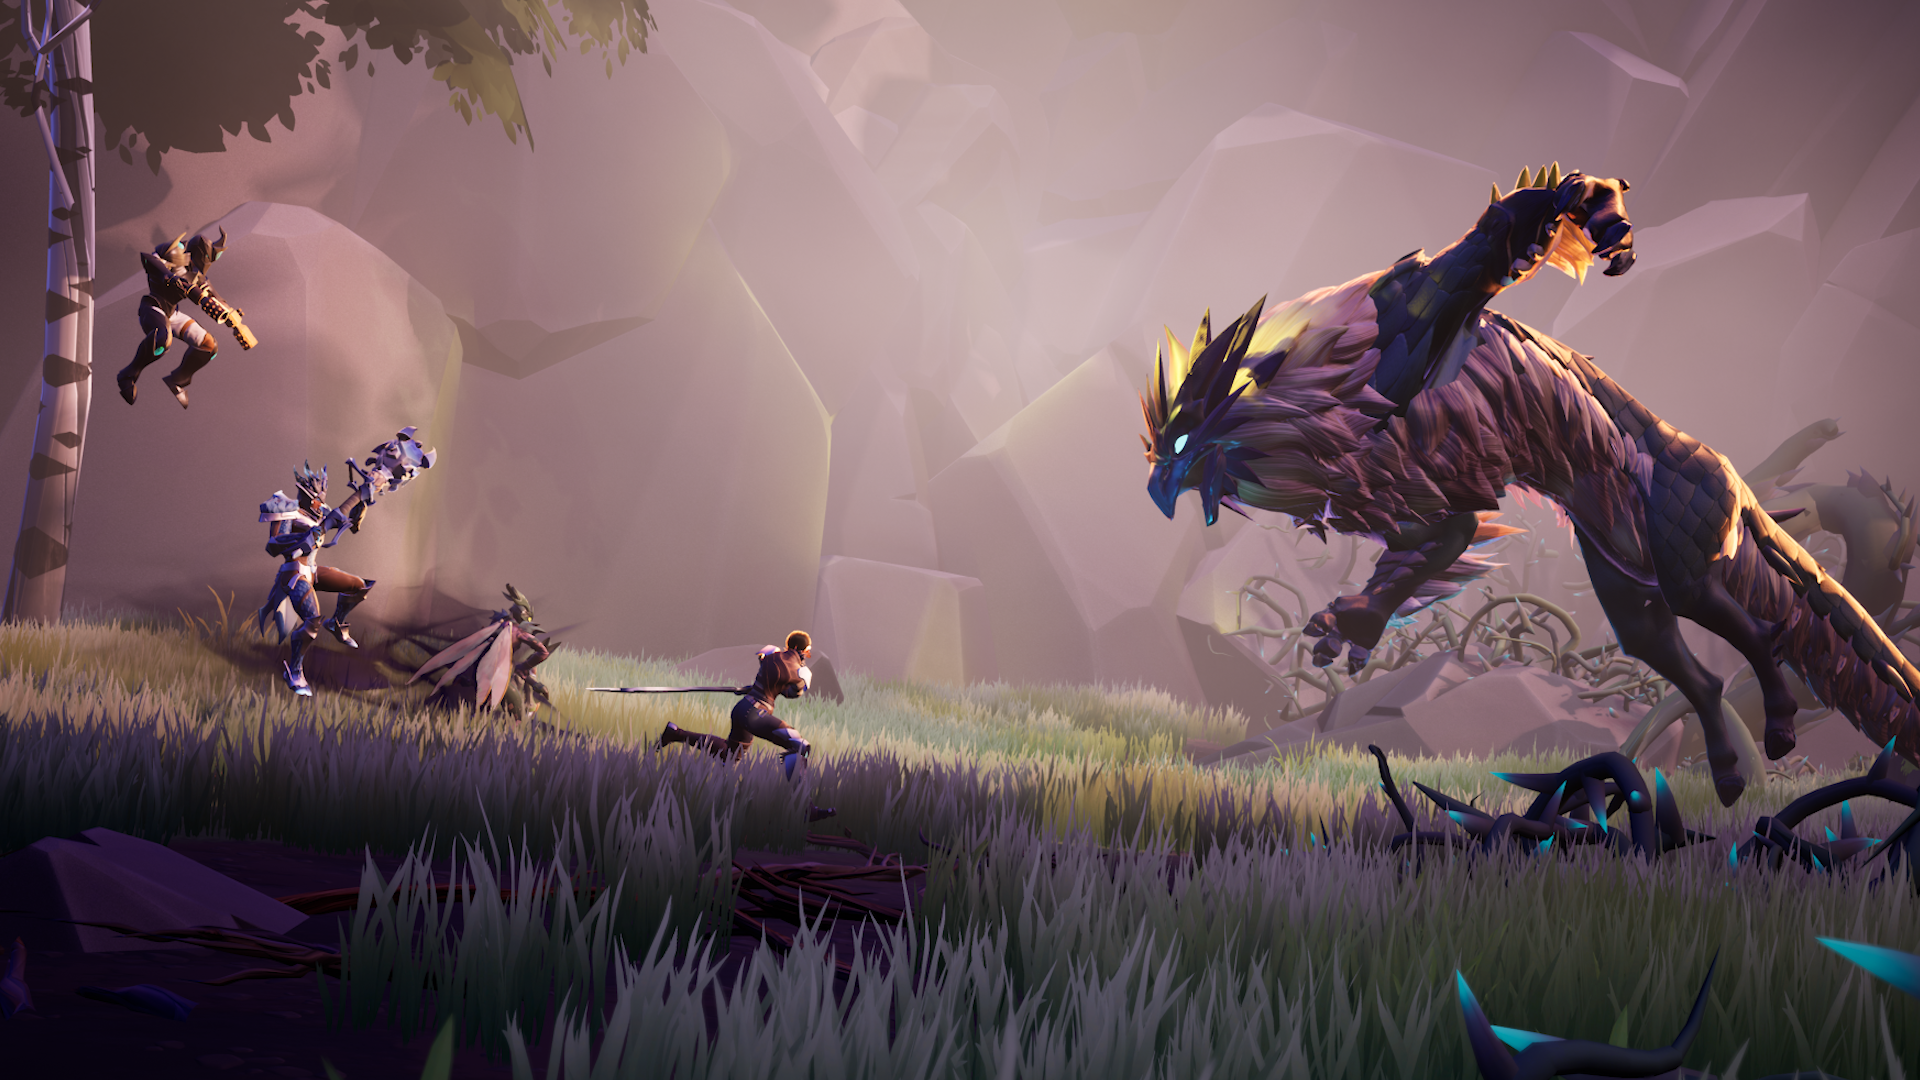 Dauntless Hits Xbox One Today with 10 Tips to Slaying with Style